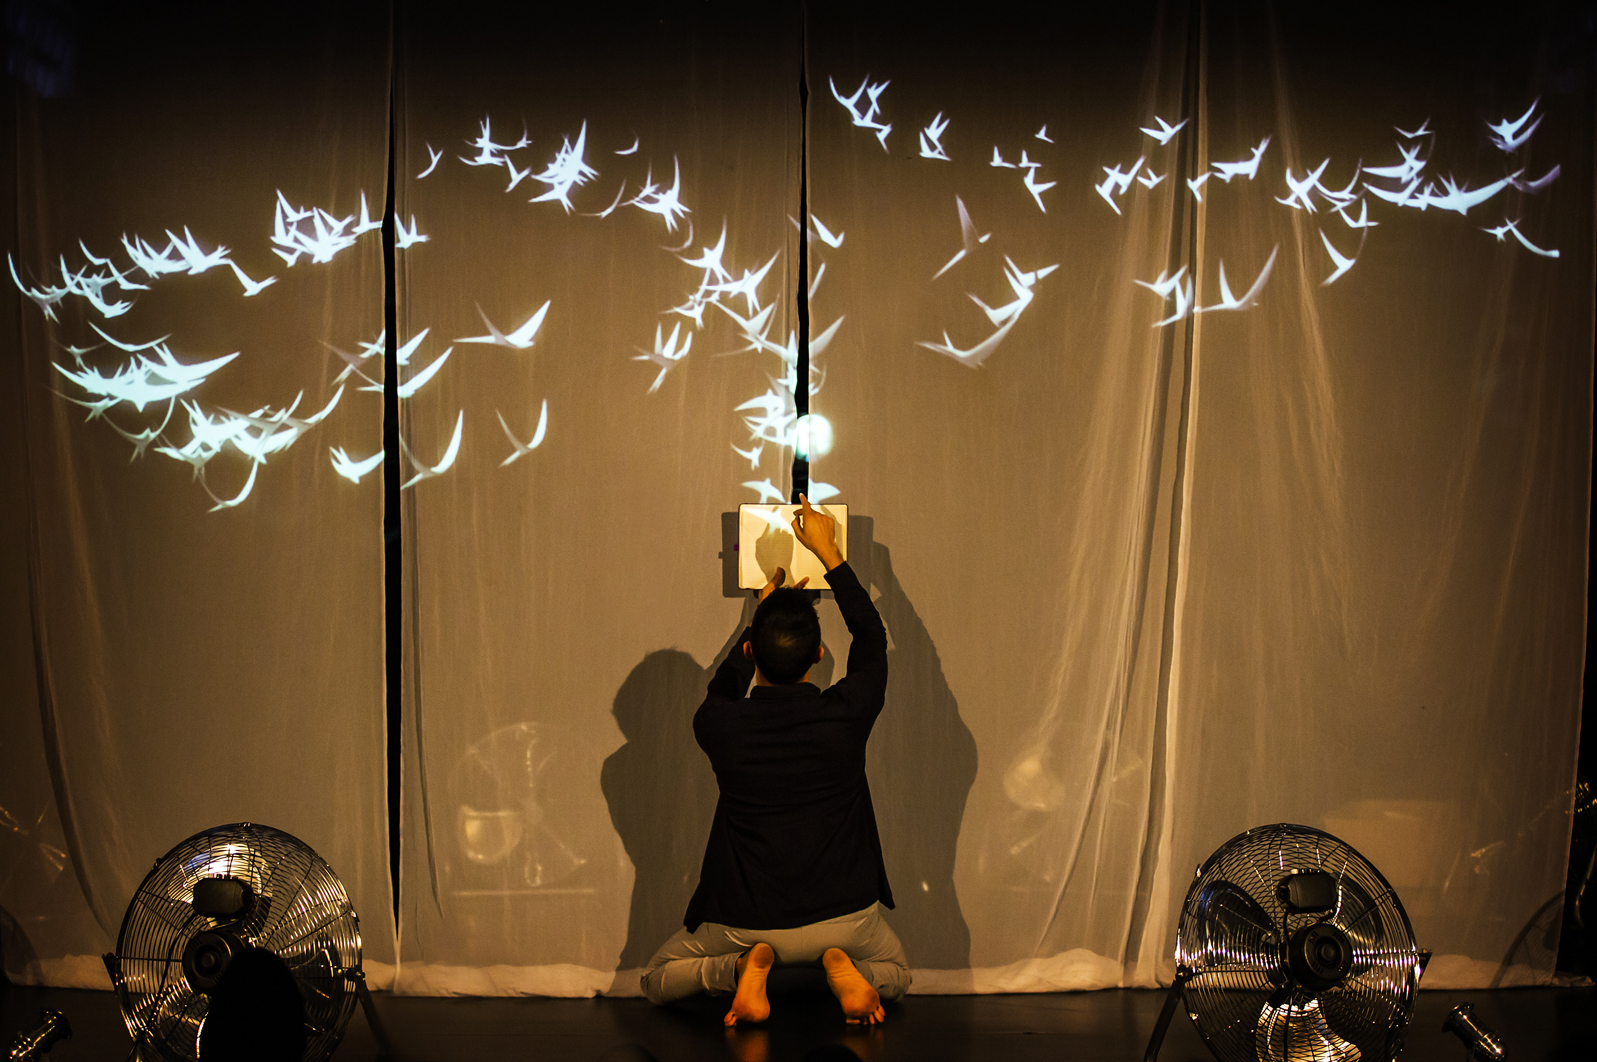 a photo from the performance, showing a flock of birds projected on a sheet